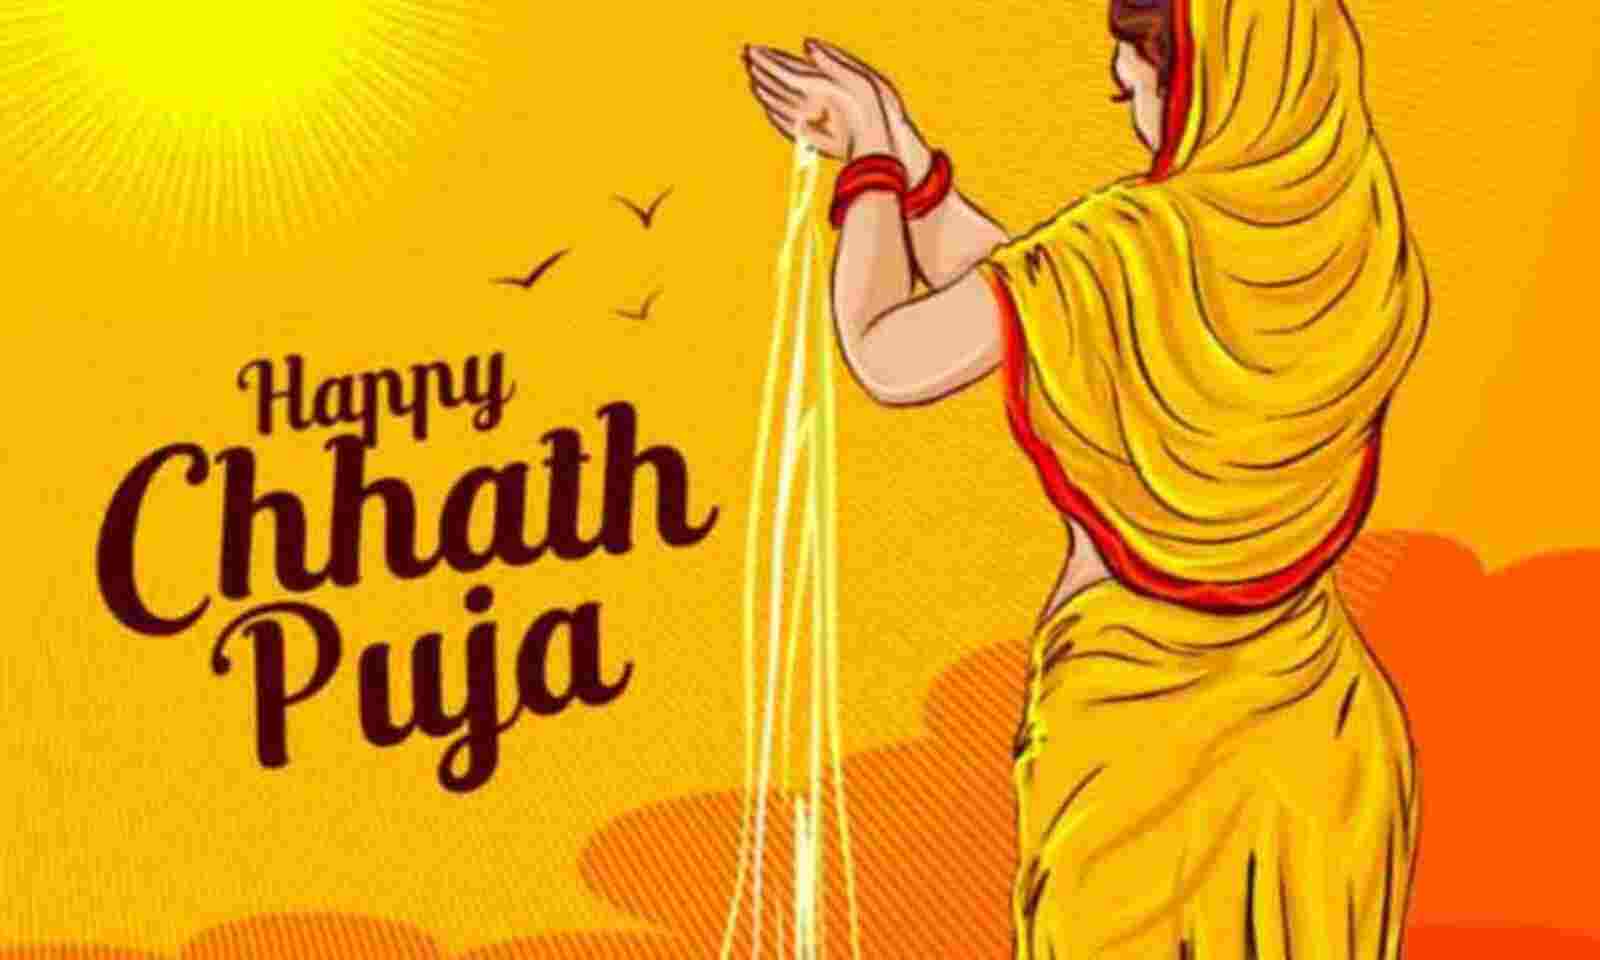 Chhath Puja Wallpapers HD Images, Pictures, for Facebook, Whatsapp